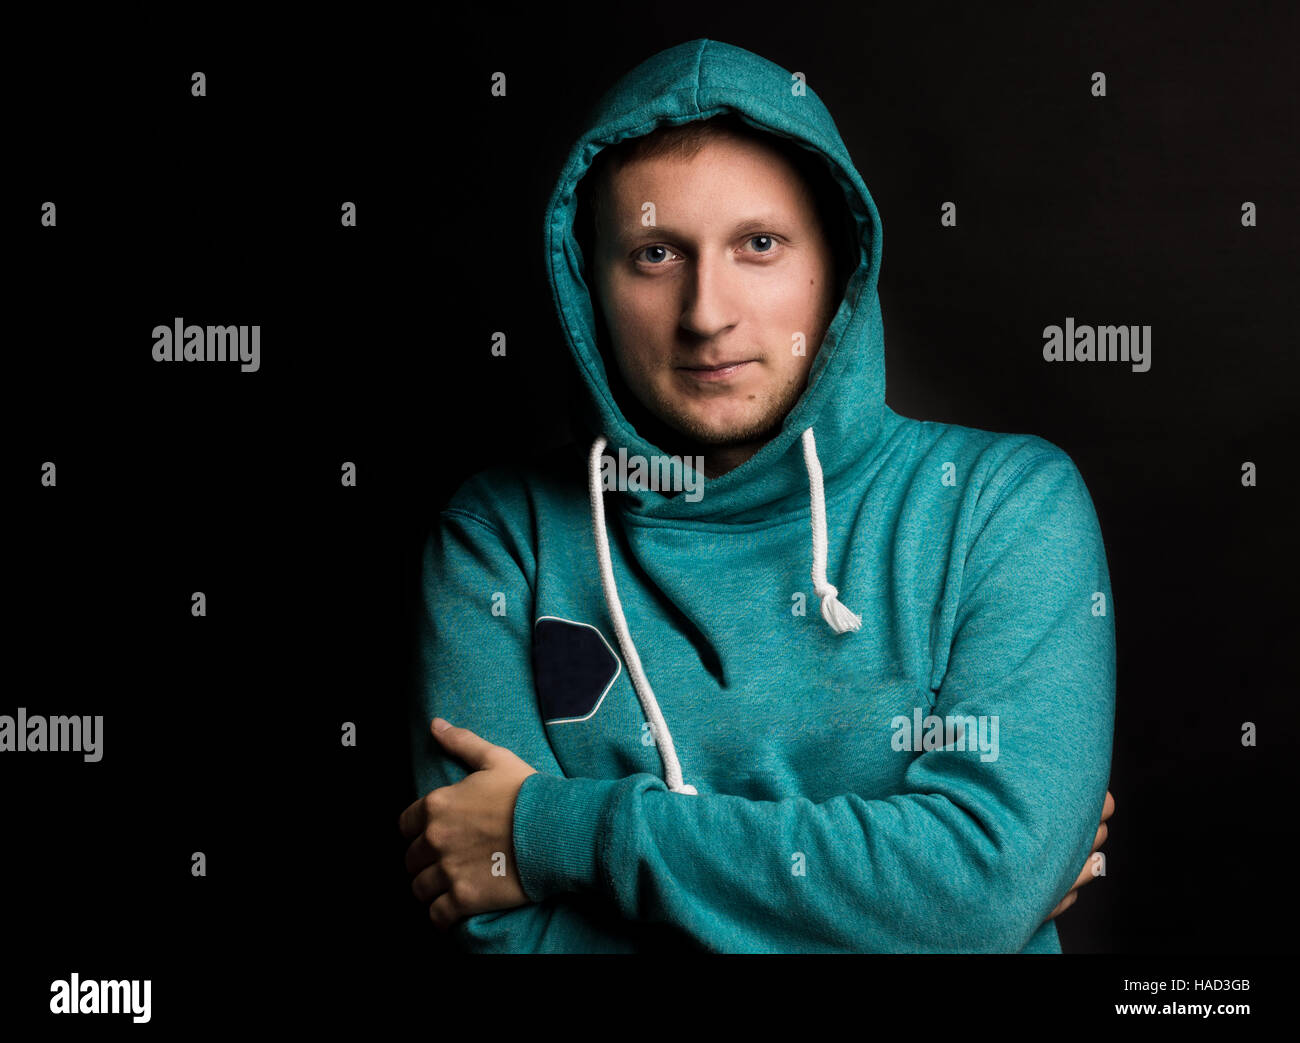 caucasian man dressed in a blue jacket with a hood looking at the screen. Black background Stock Photo